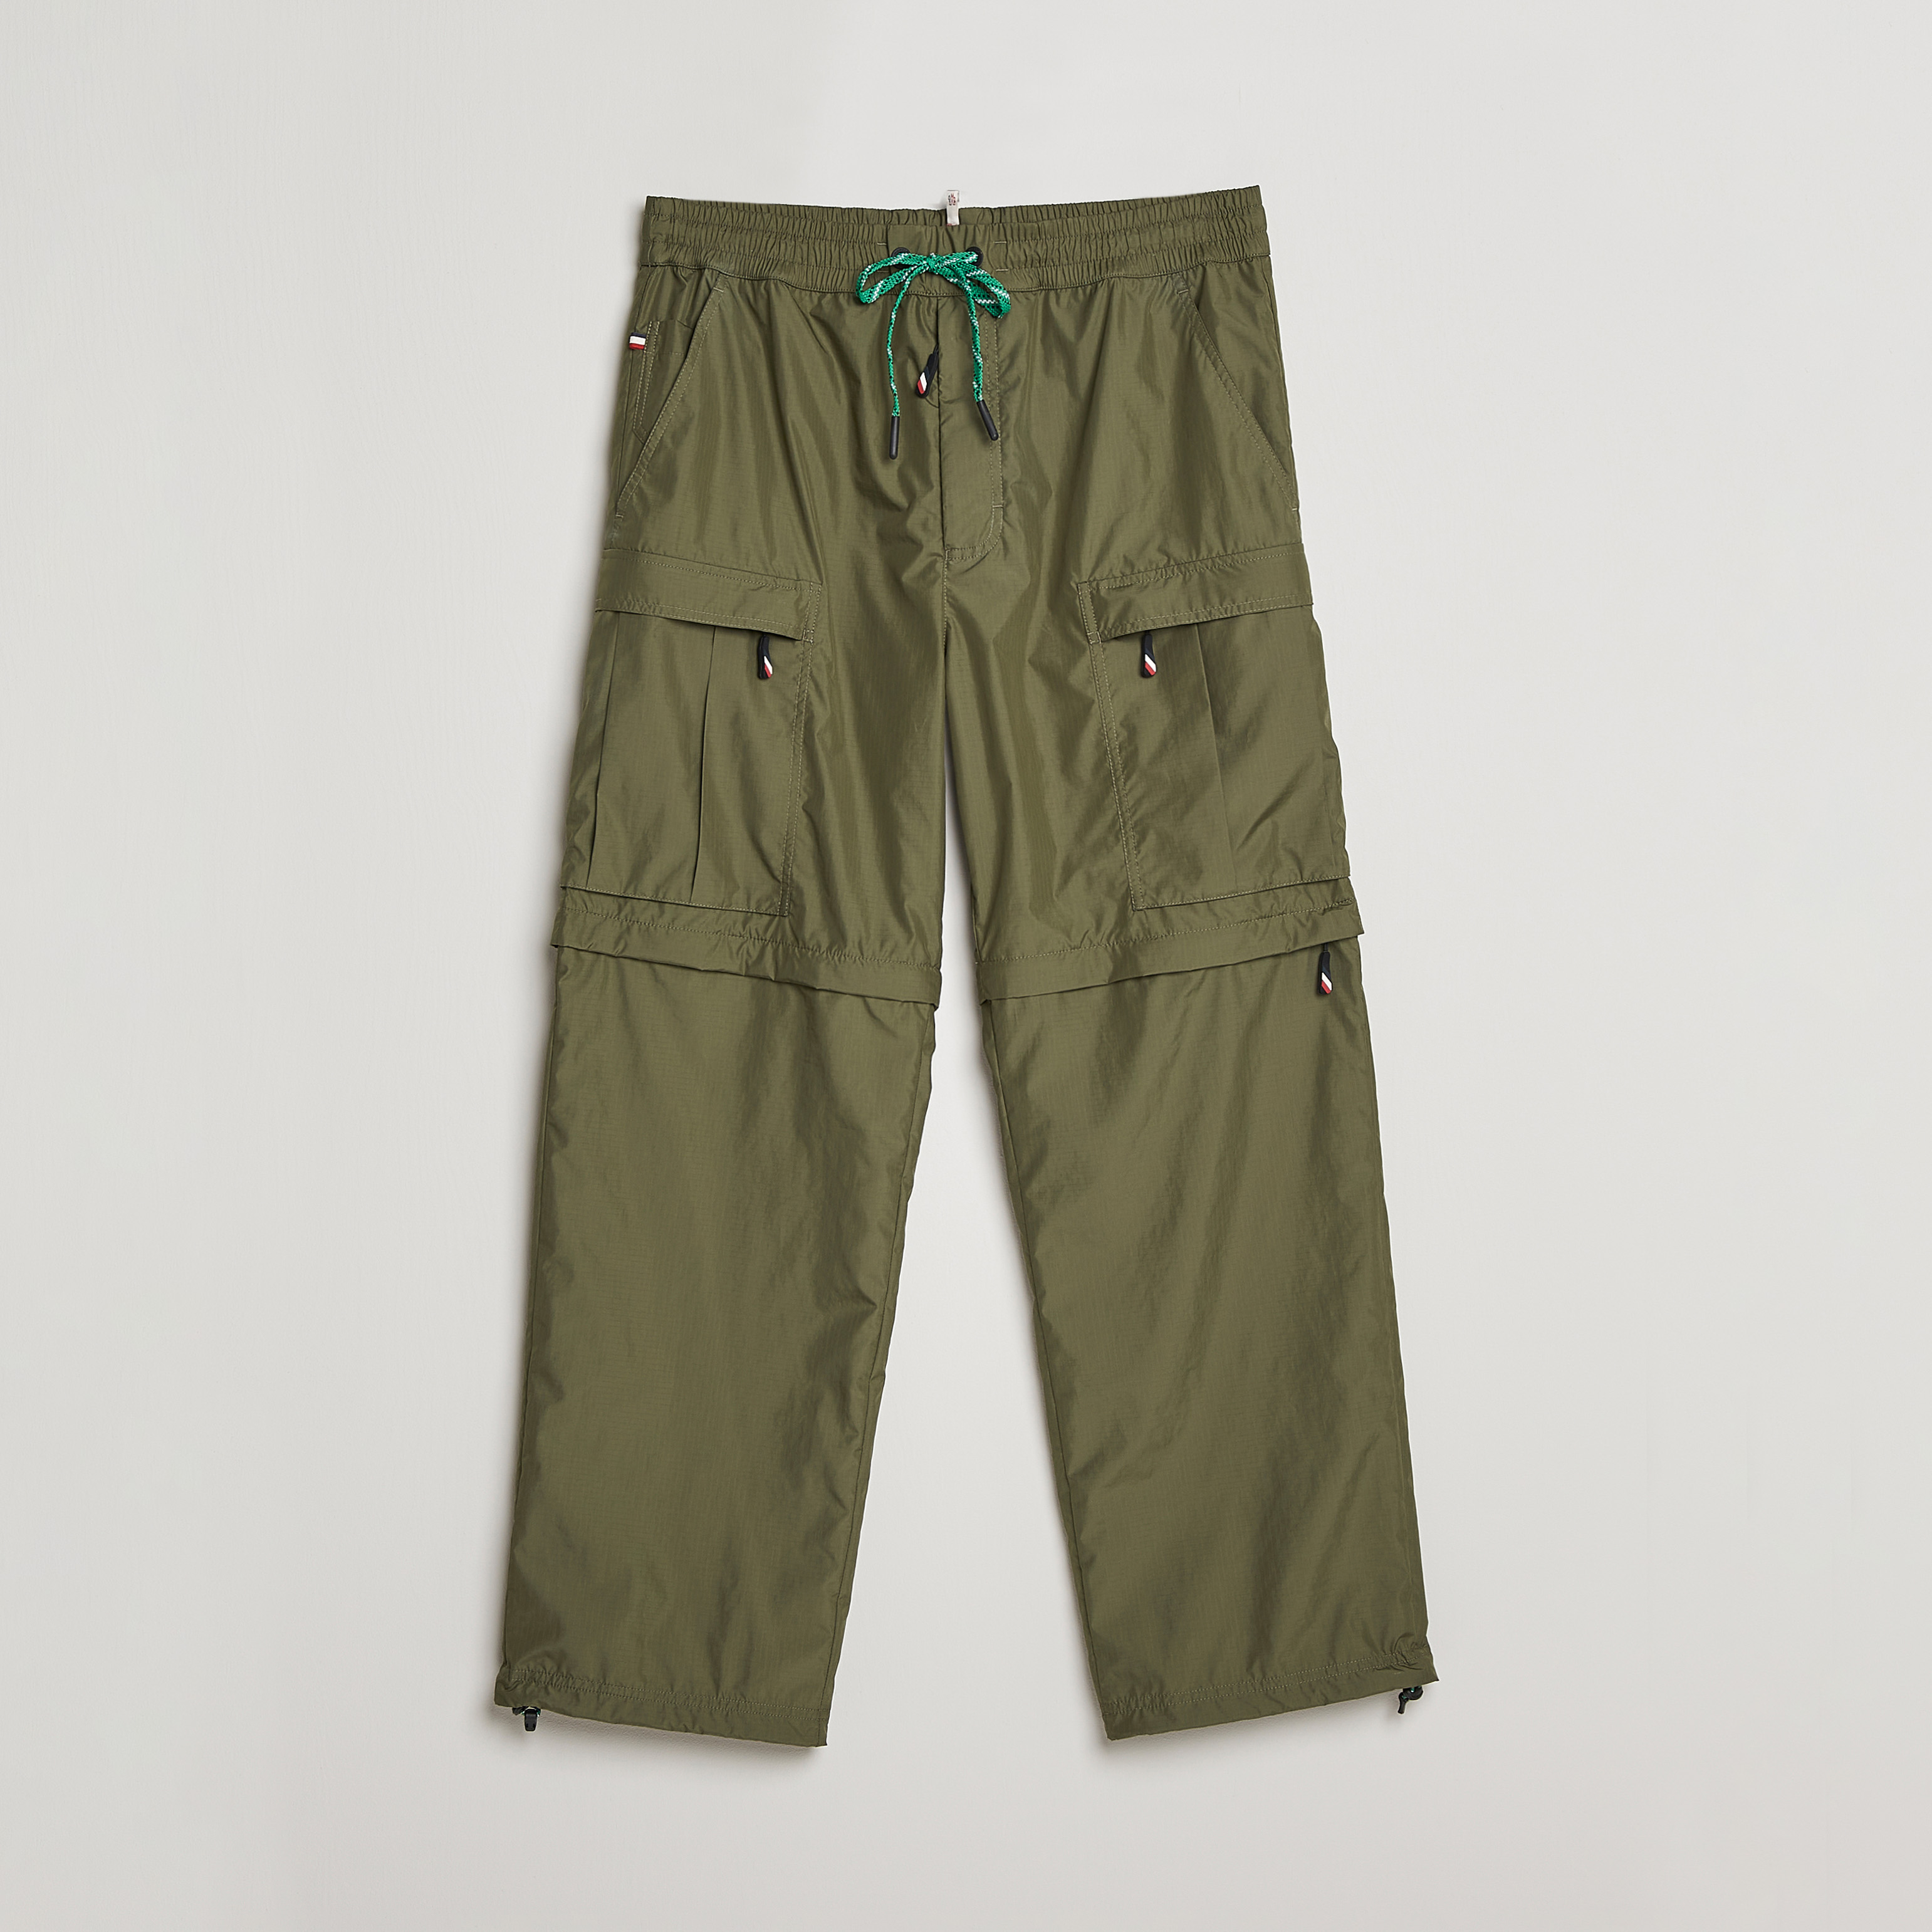 Moncler Grenoble Zip Off Cargo Pants Olive at CareOfCarl.com